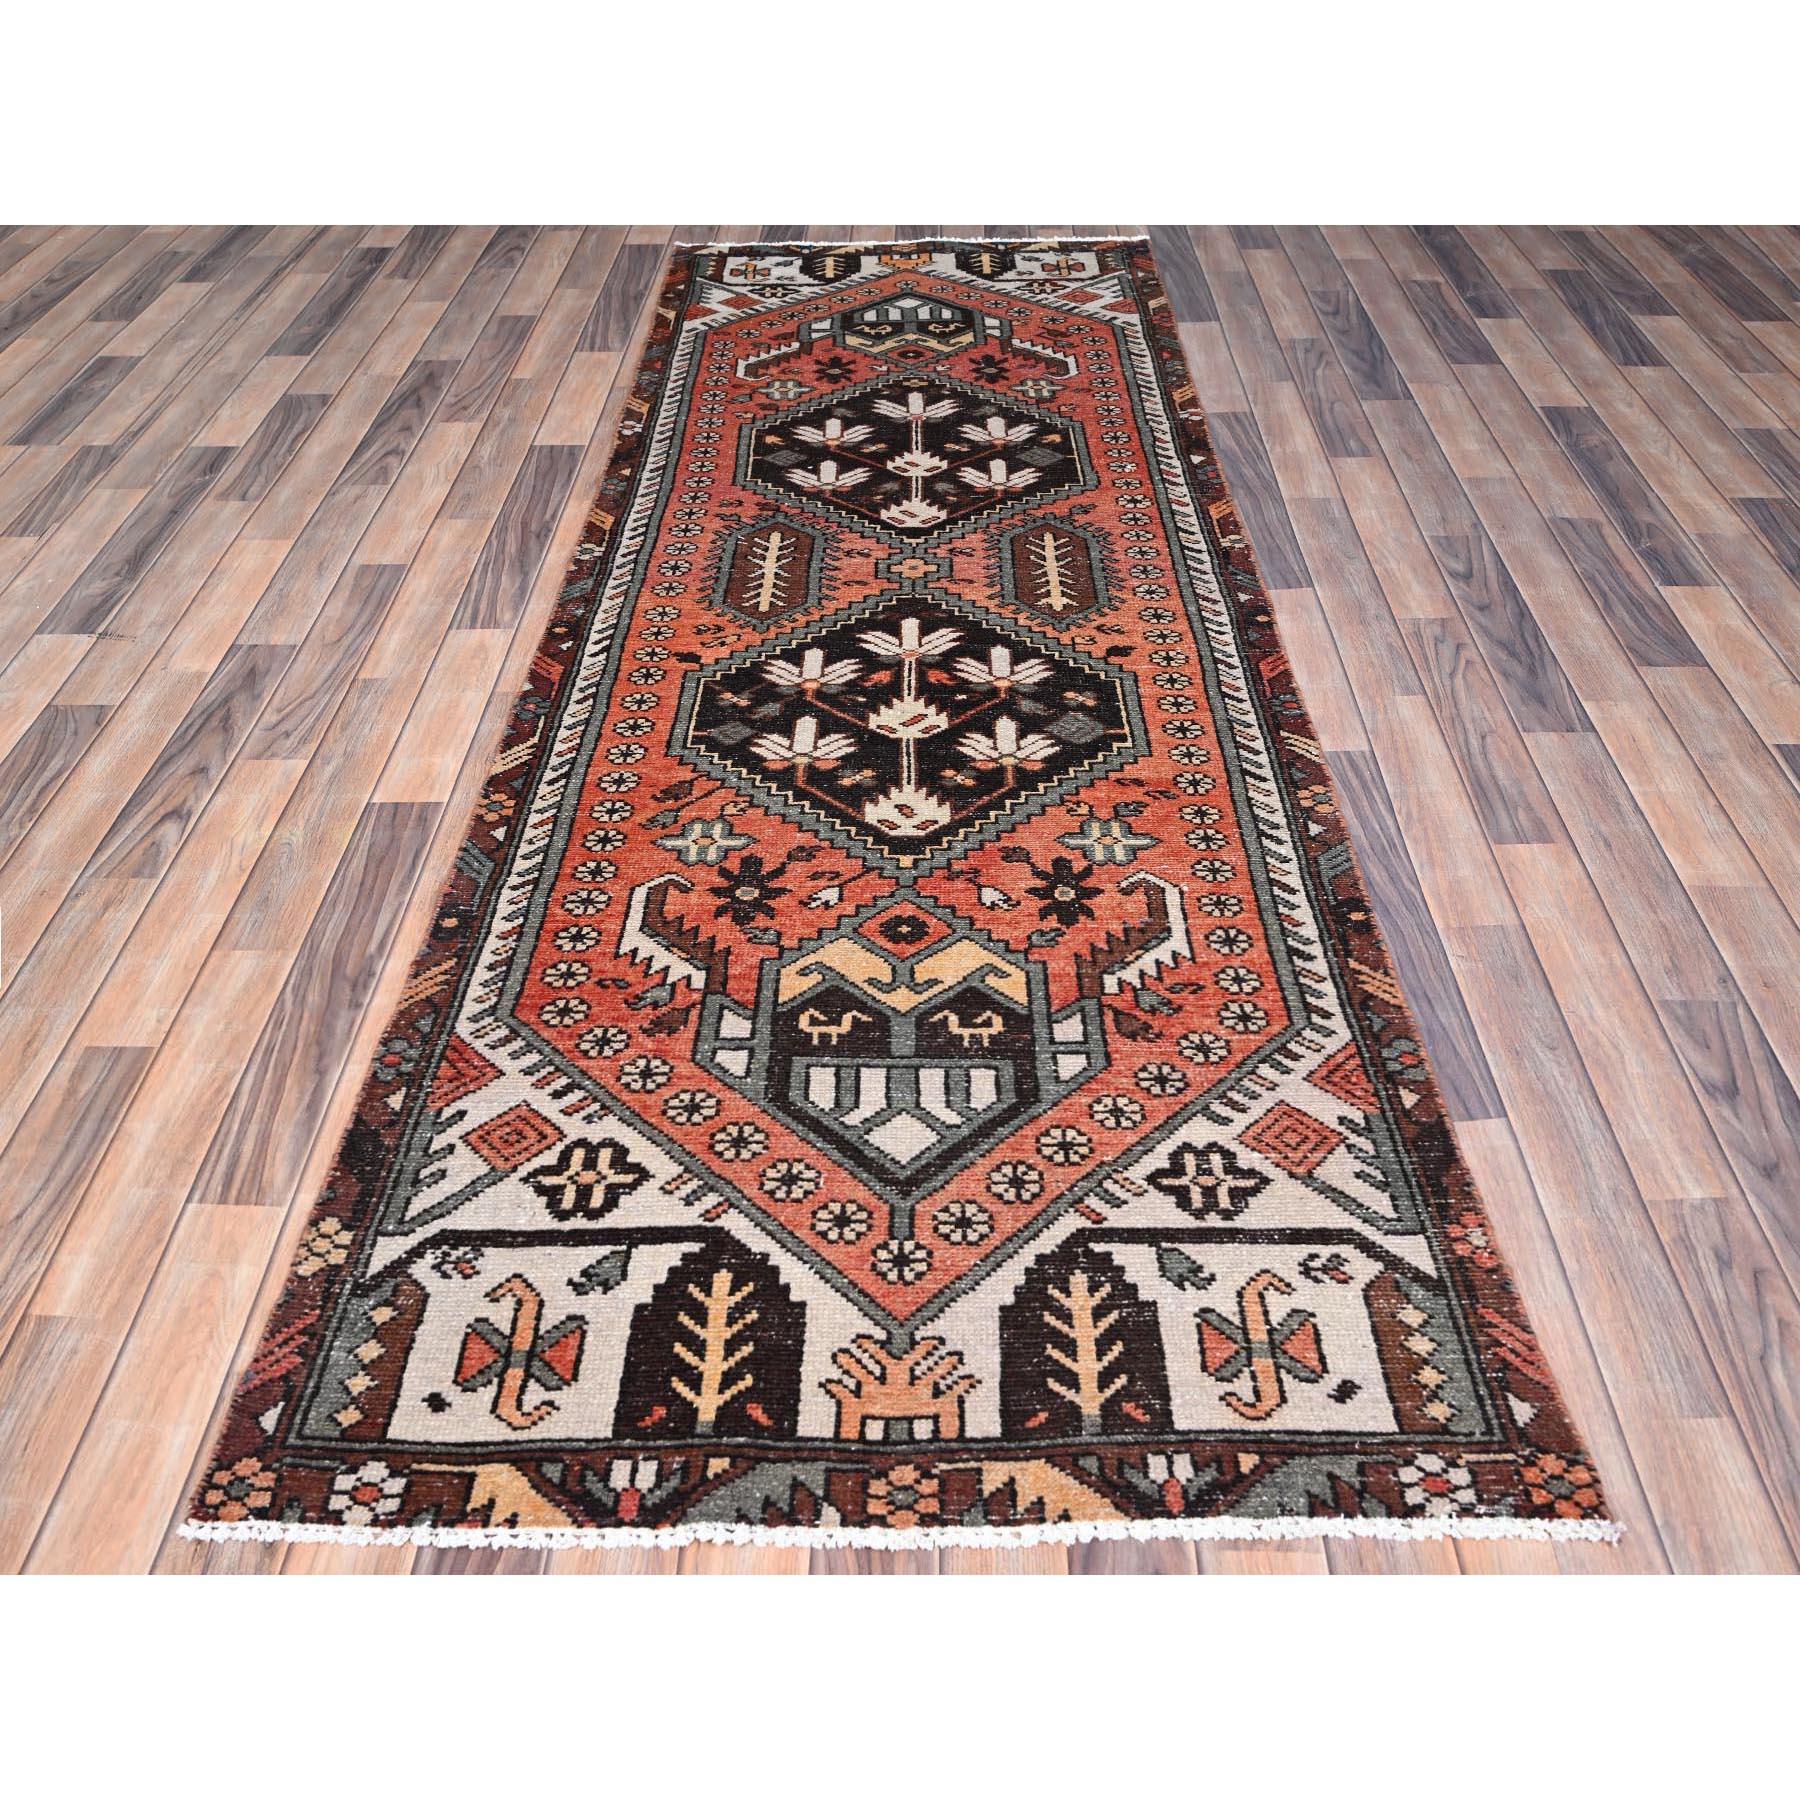 Medieval Red Hand Knotted Wool Clean Old Persian Bakhtiari Sheared Low Wide Runner Rug